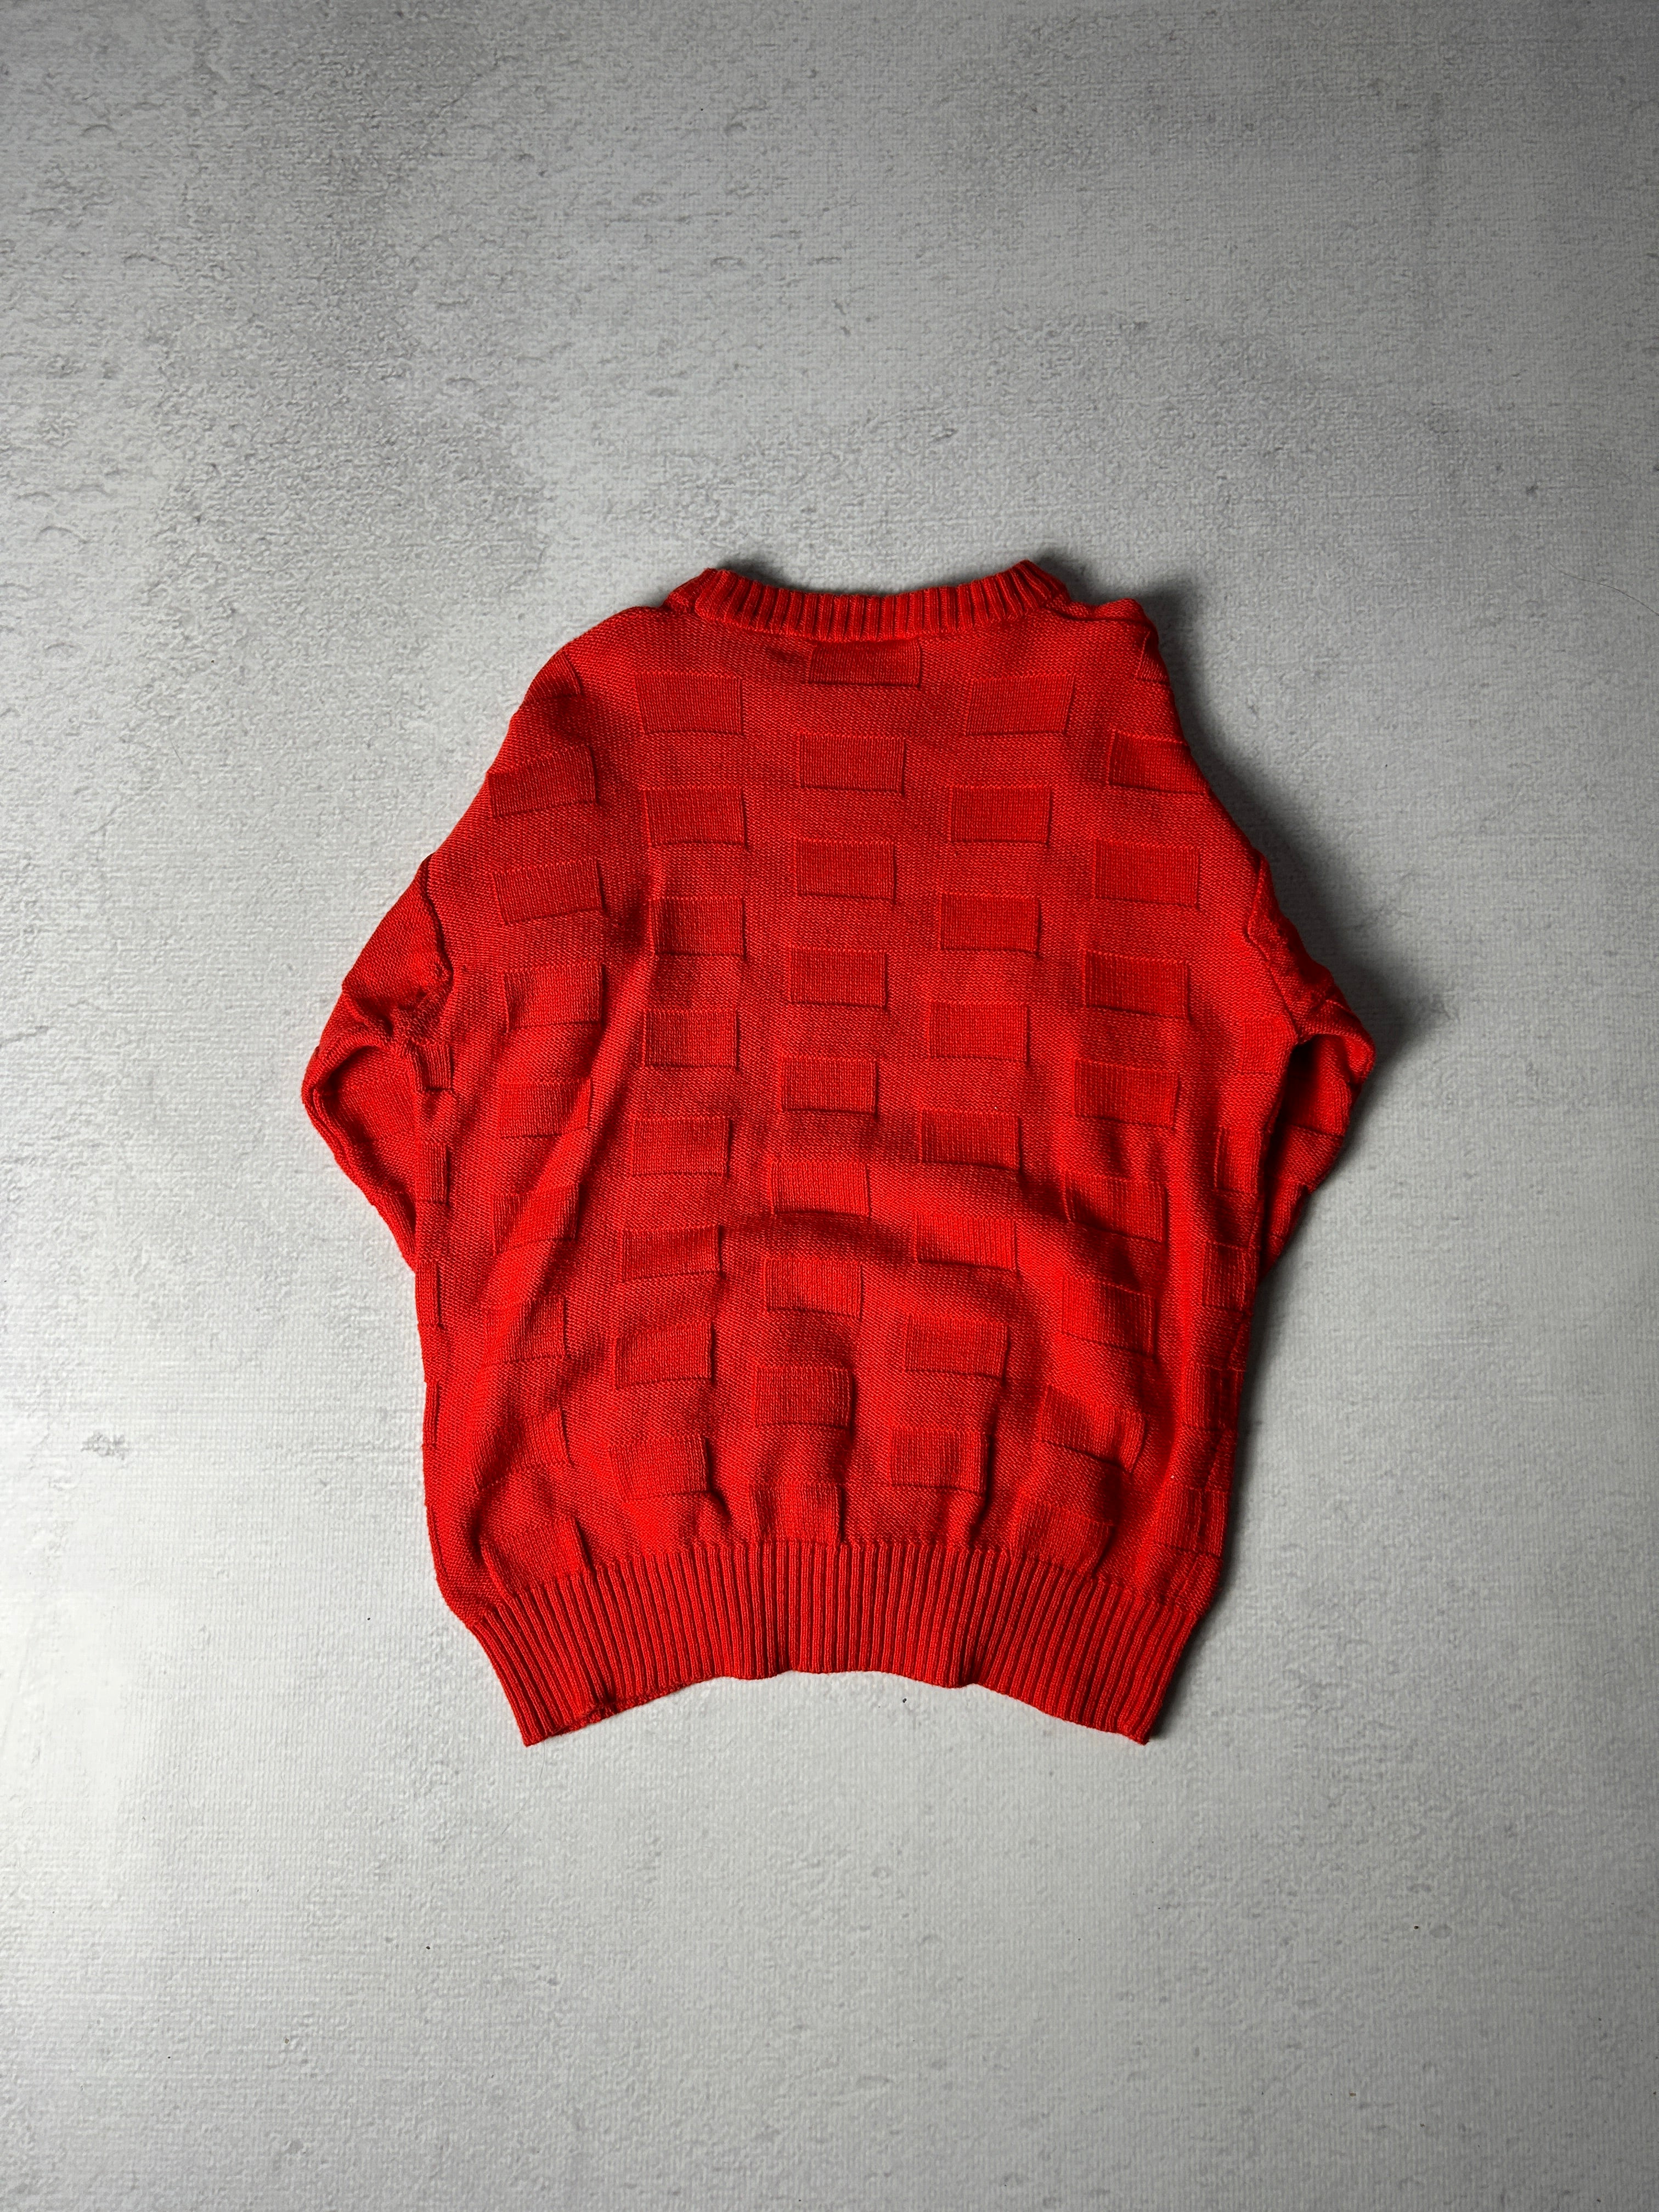 Vintage Lacoste Knitted Sweater - Women's Medium